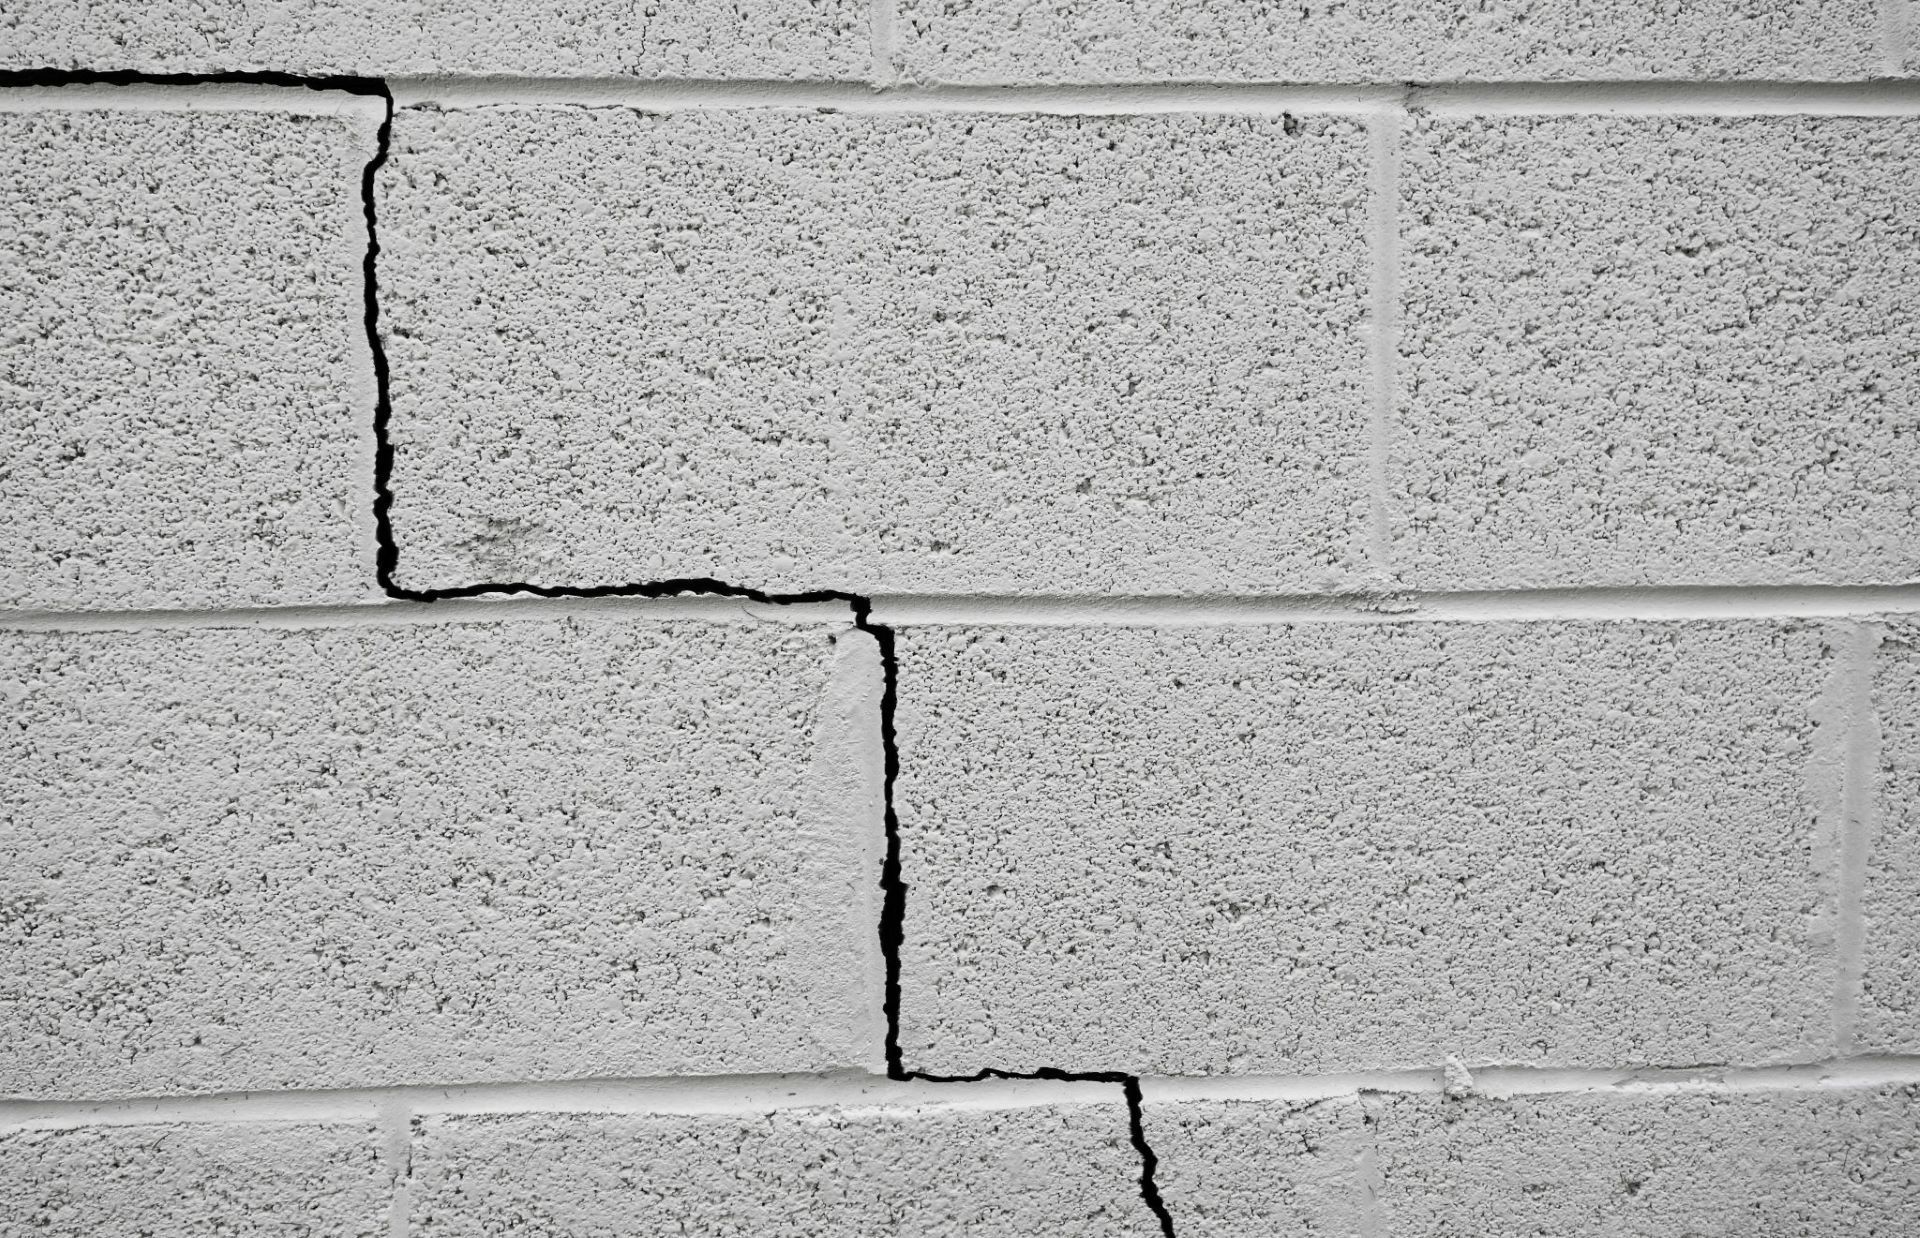 crack in foundation wall